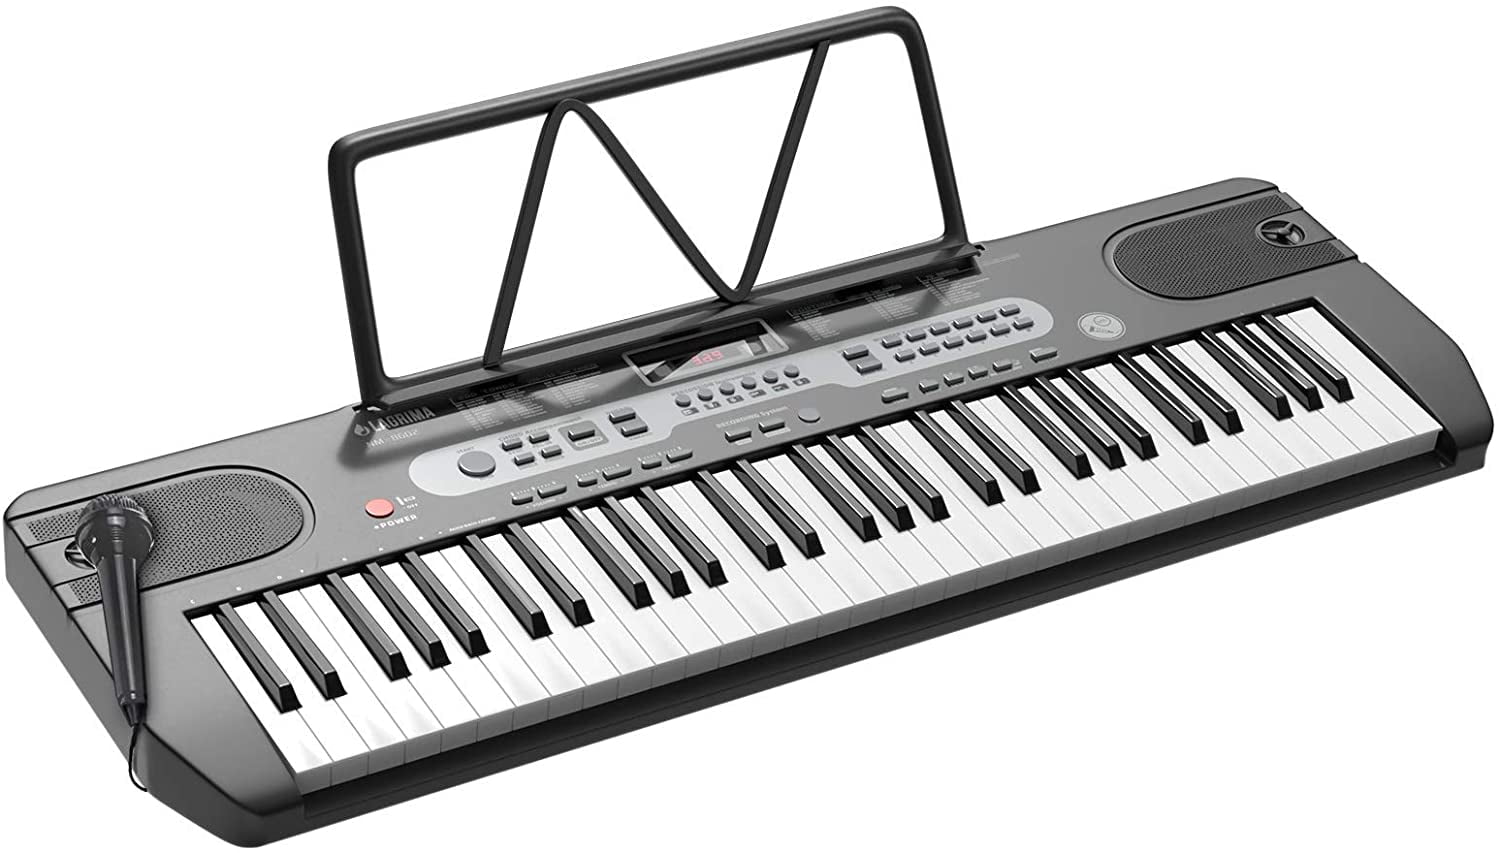 Music Sheet Stand for Beginner Kids LAGRIMA LAG-740 61 Key Portable Electric Keyboard Piano with Built In Speakers Black Microphone Dual Power Supply Digital Display Screen Adult Recording 